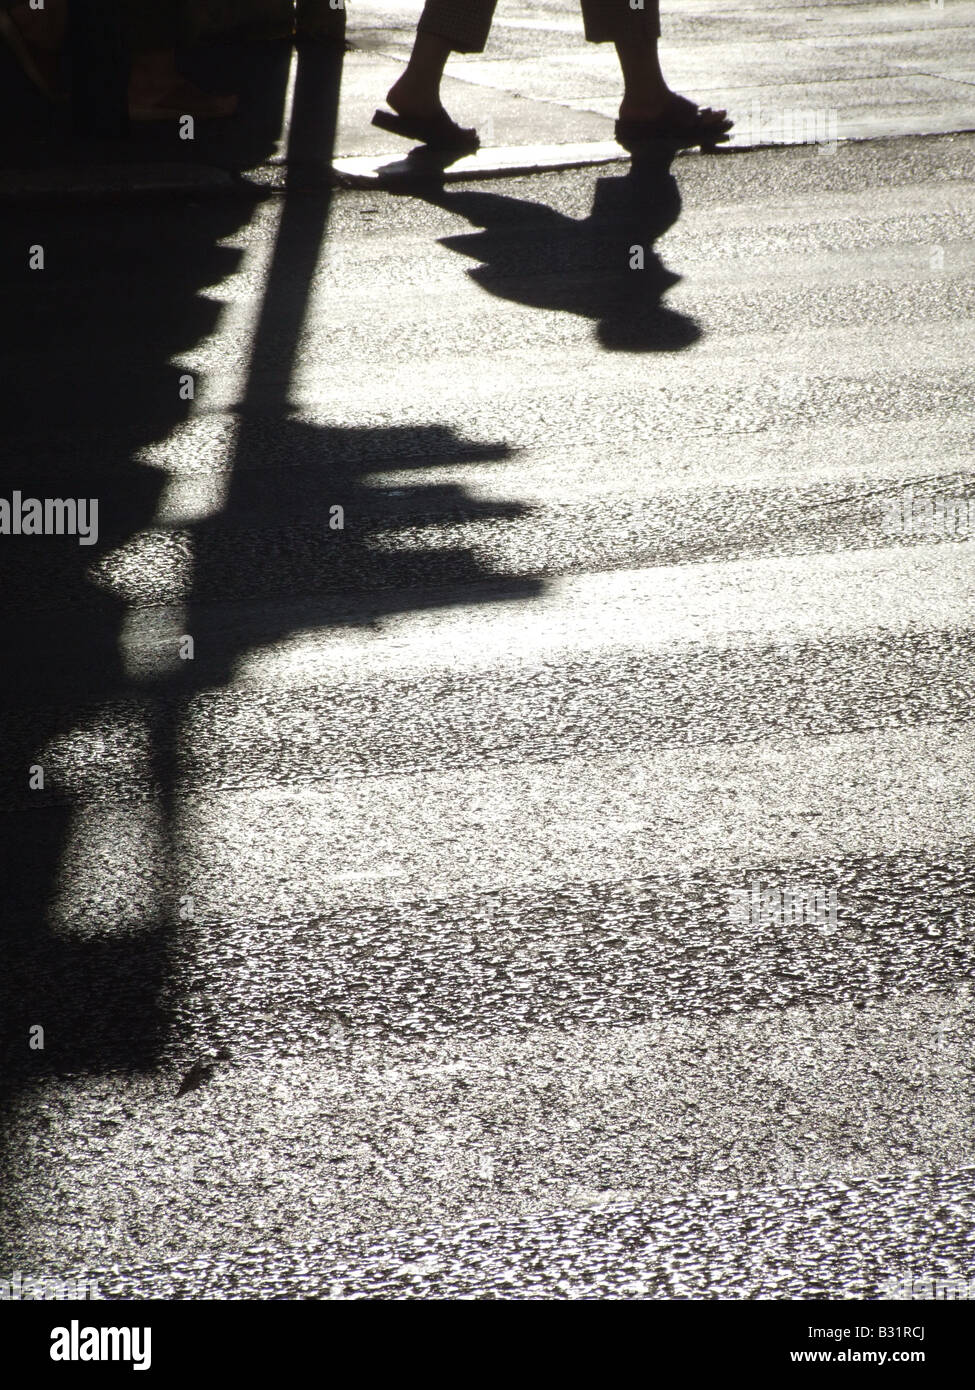 person's dark shadow on road surface in town Stock Photo